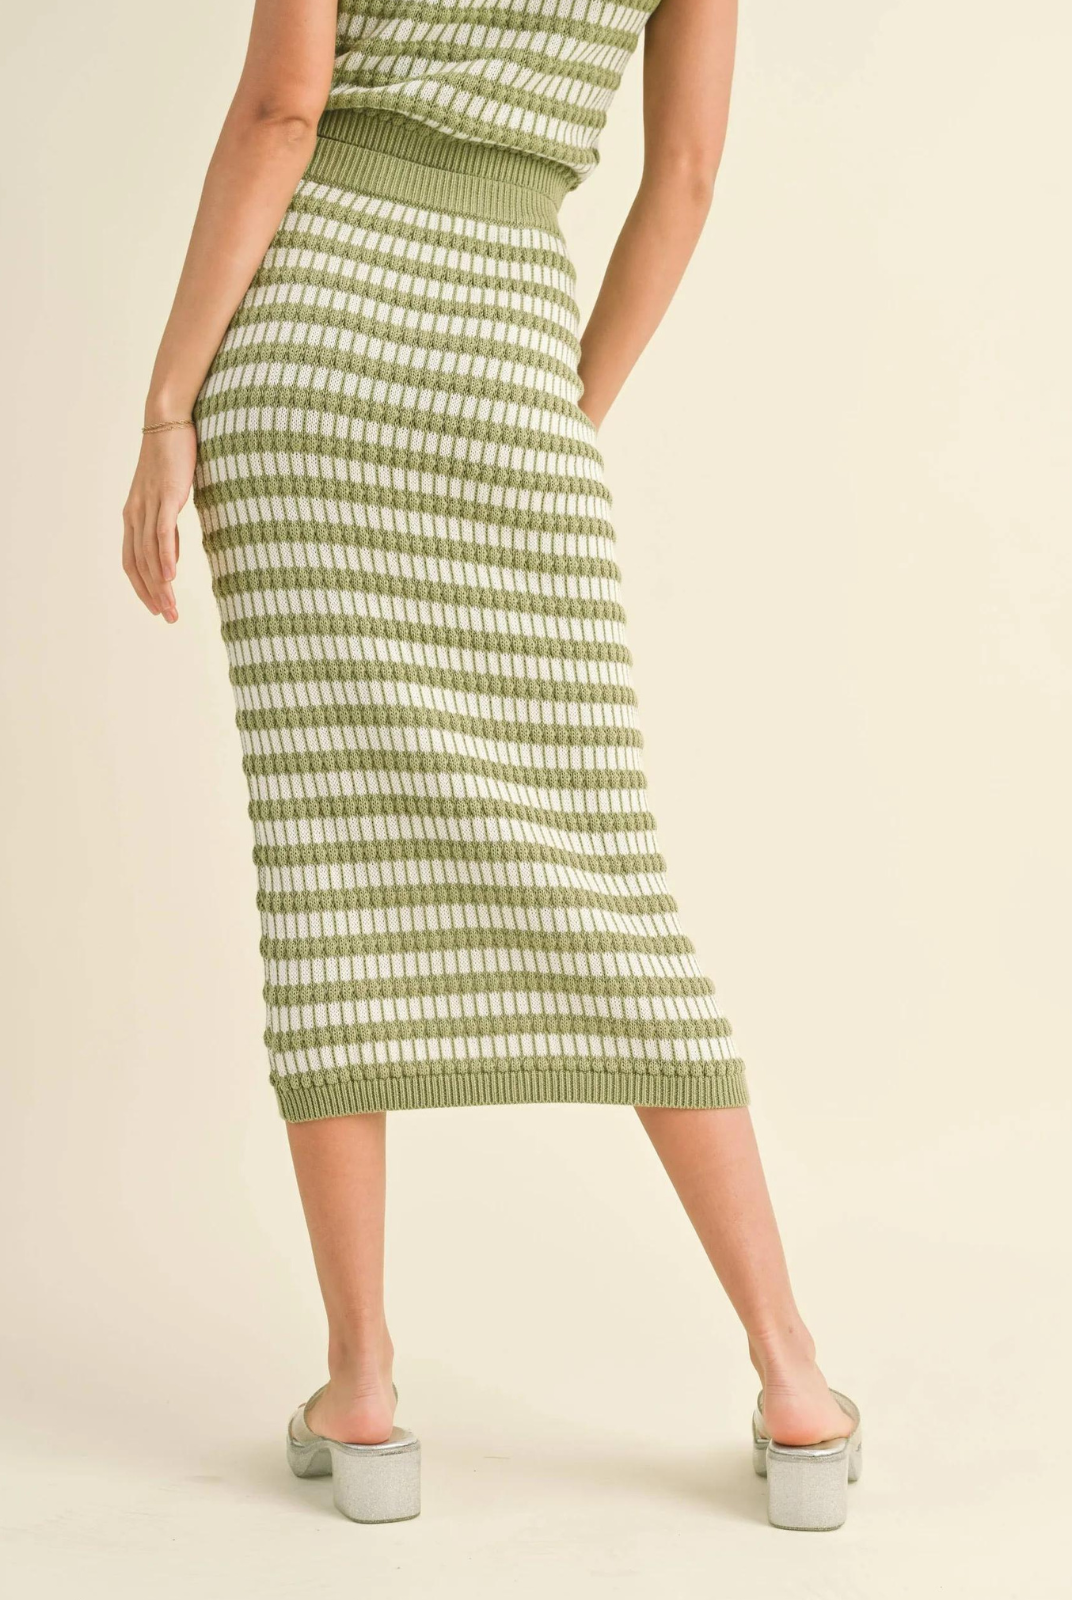 Get the ultimate cozy and stylish look with our Lili Knit Skirt! The stretch fit guarantees a comfortable and flattering fit, while the mixed color pattern adds a unique touch. Plus, don't forget to pair it with our matching top for a complete set!